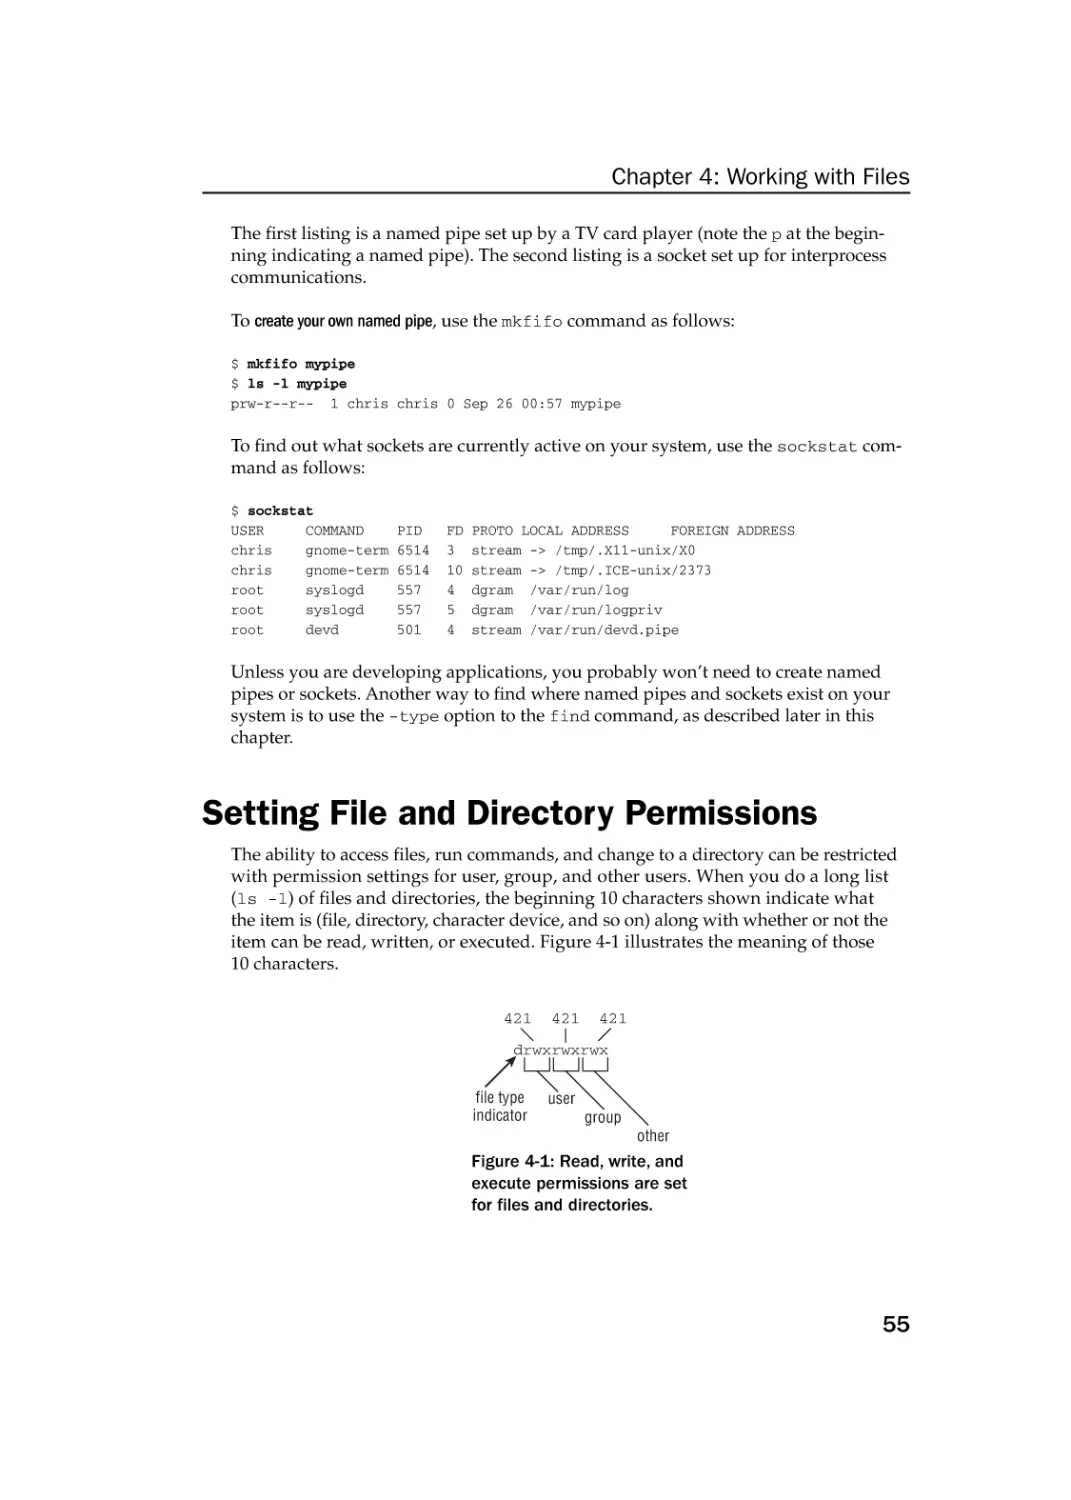 Setting File and Directory Permissions